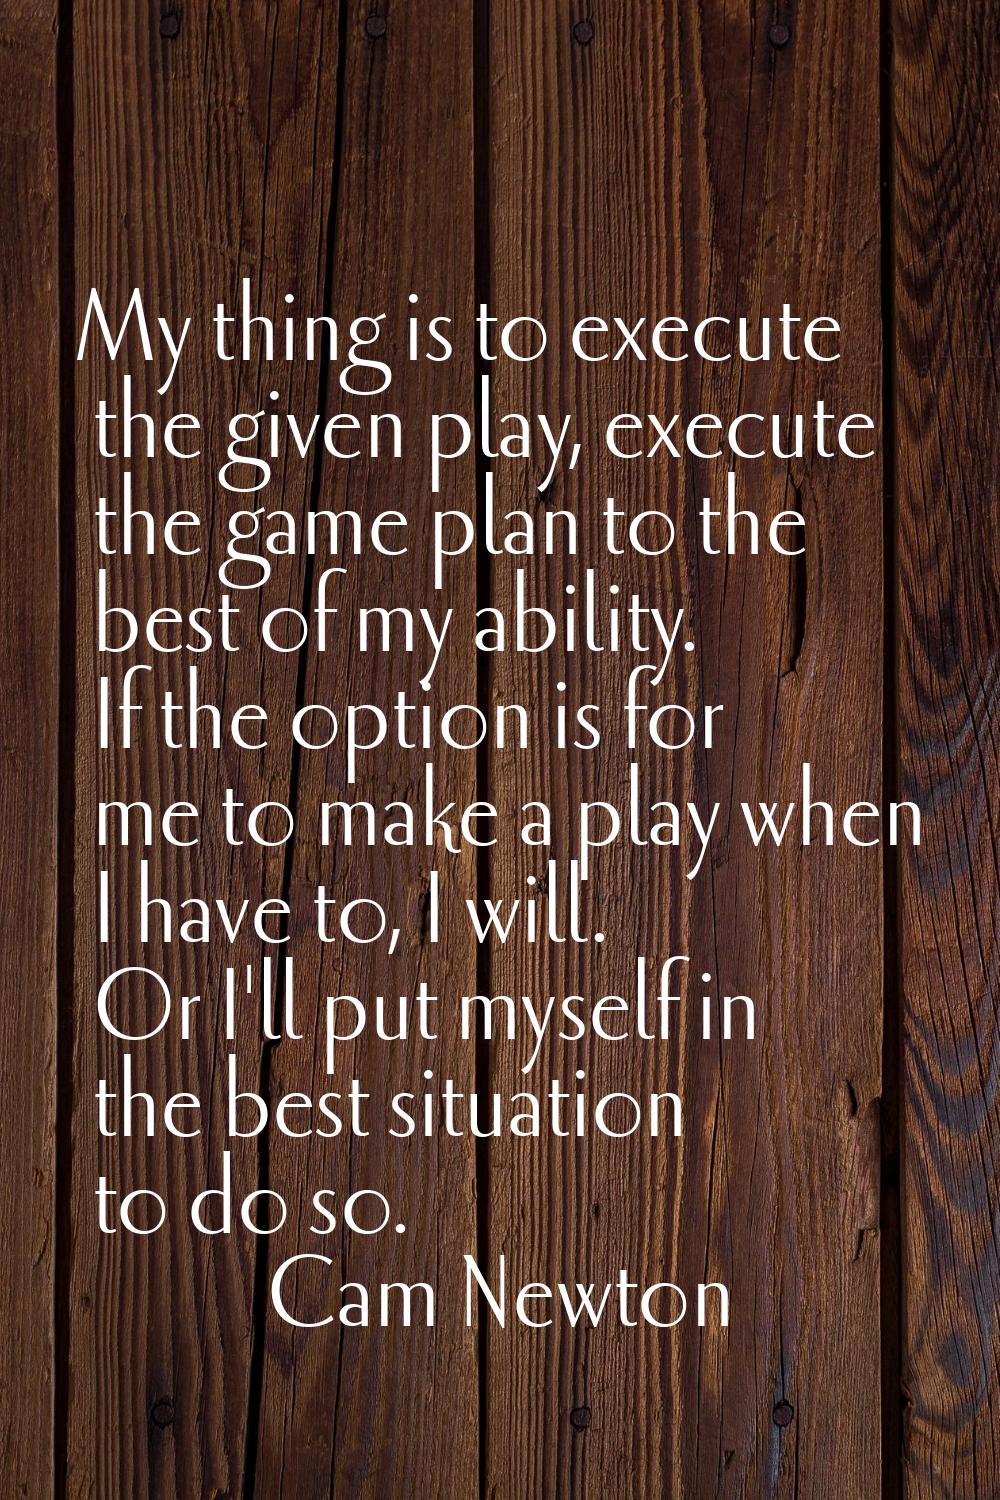 My thing is to execute the given play, execute the game plan to the best of my ability. If the opti